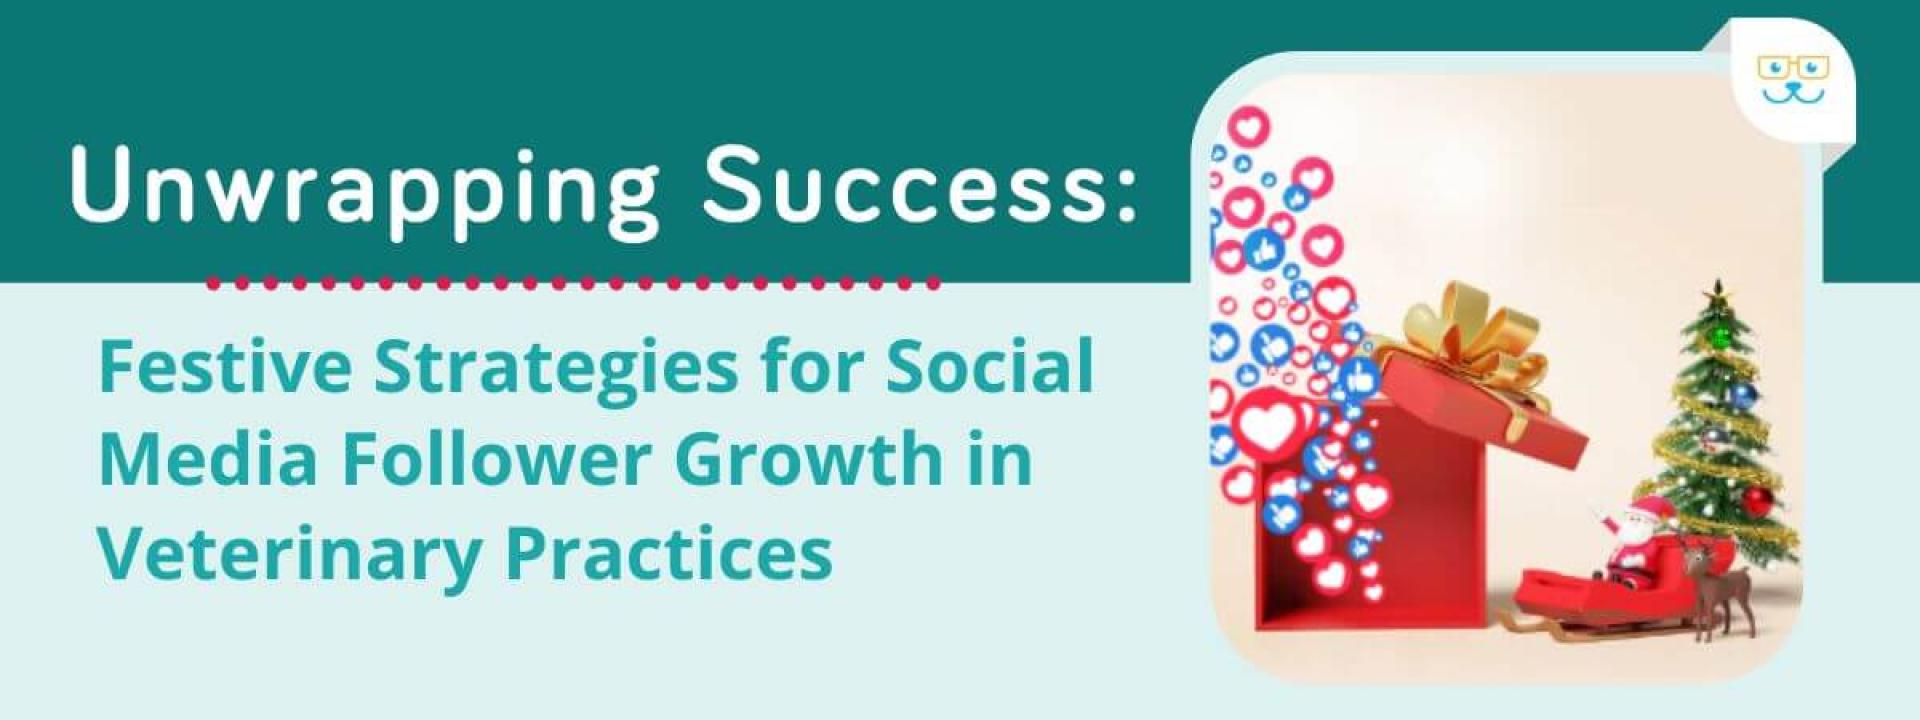 Unwrapping Success: Festive Strategies for Social Media Follower Growth in Veterinary Practices